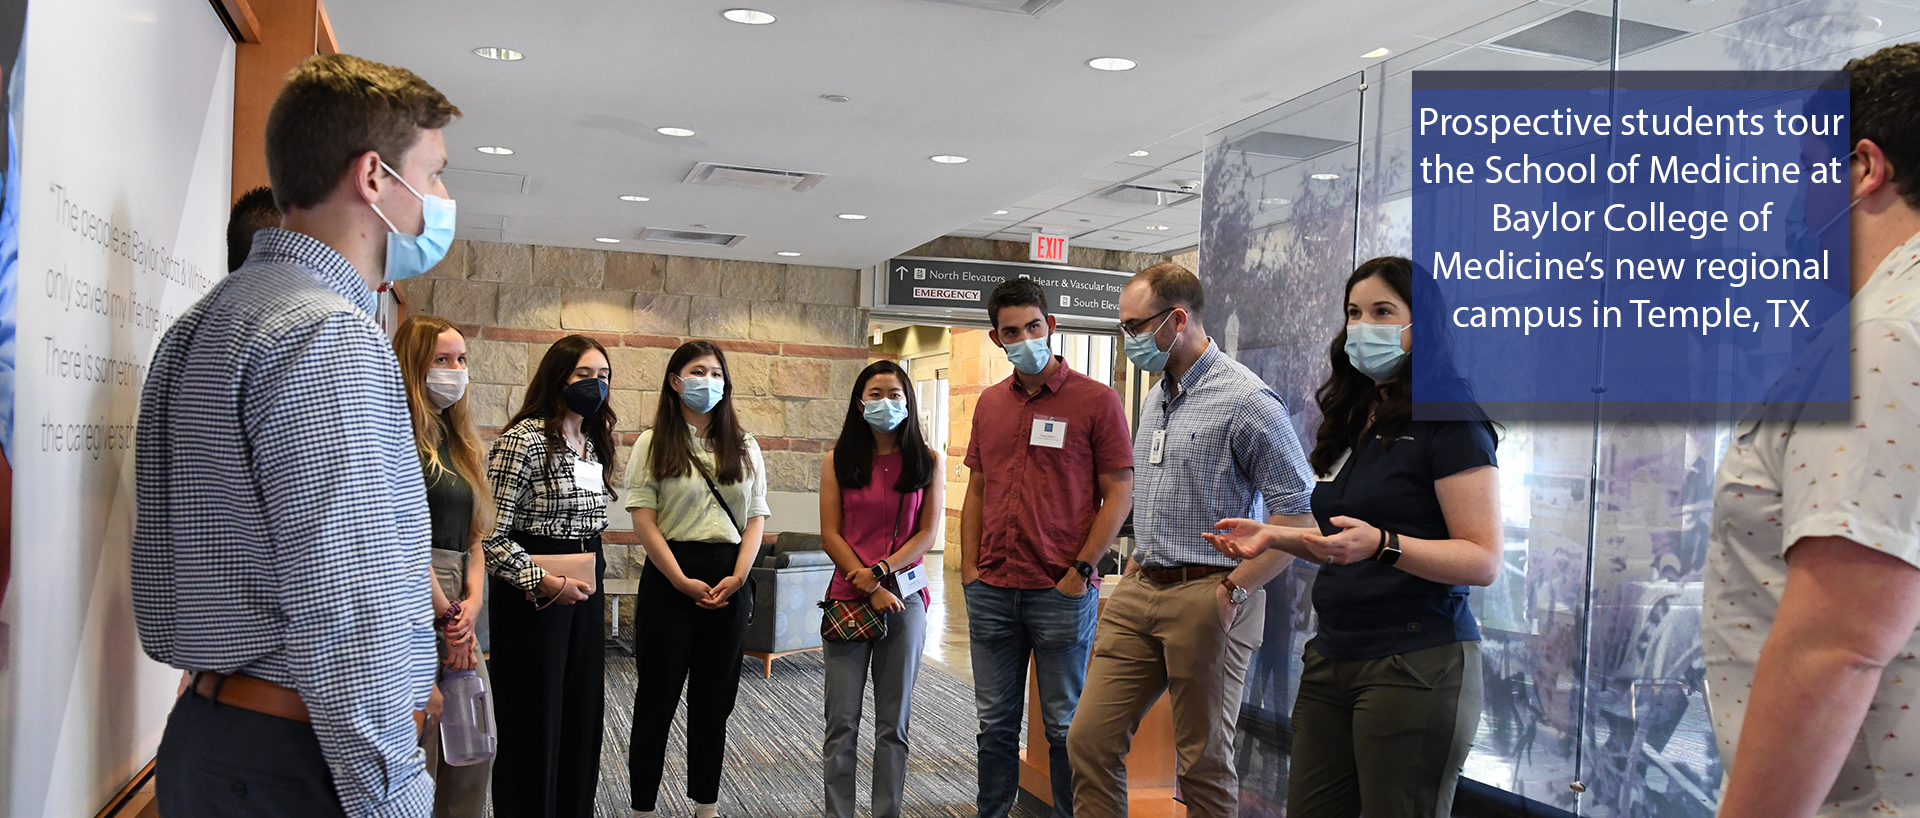 Prospective medical school students tour the School of Medicine at Baylor College of Medicine’s new regional campus in Temple, TX    